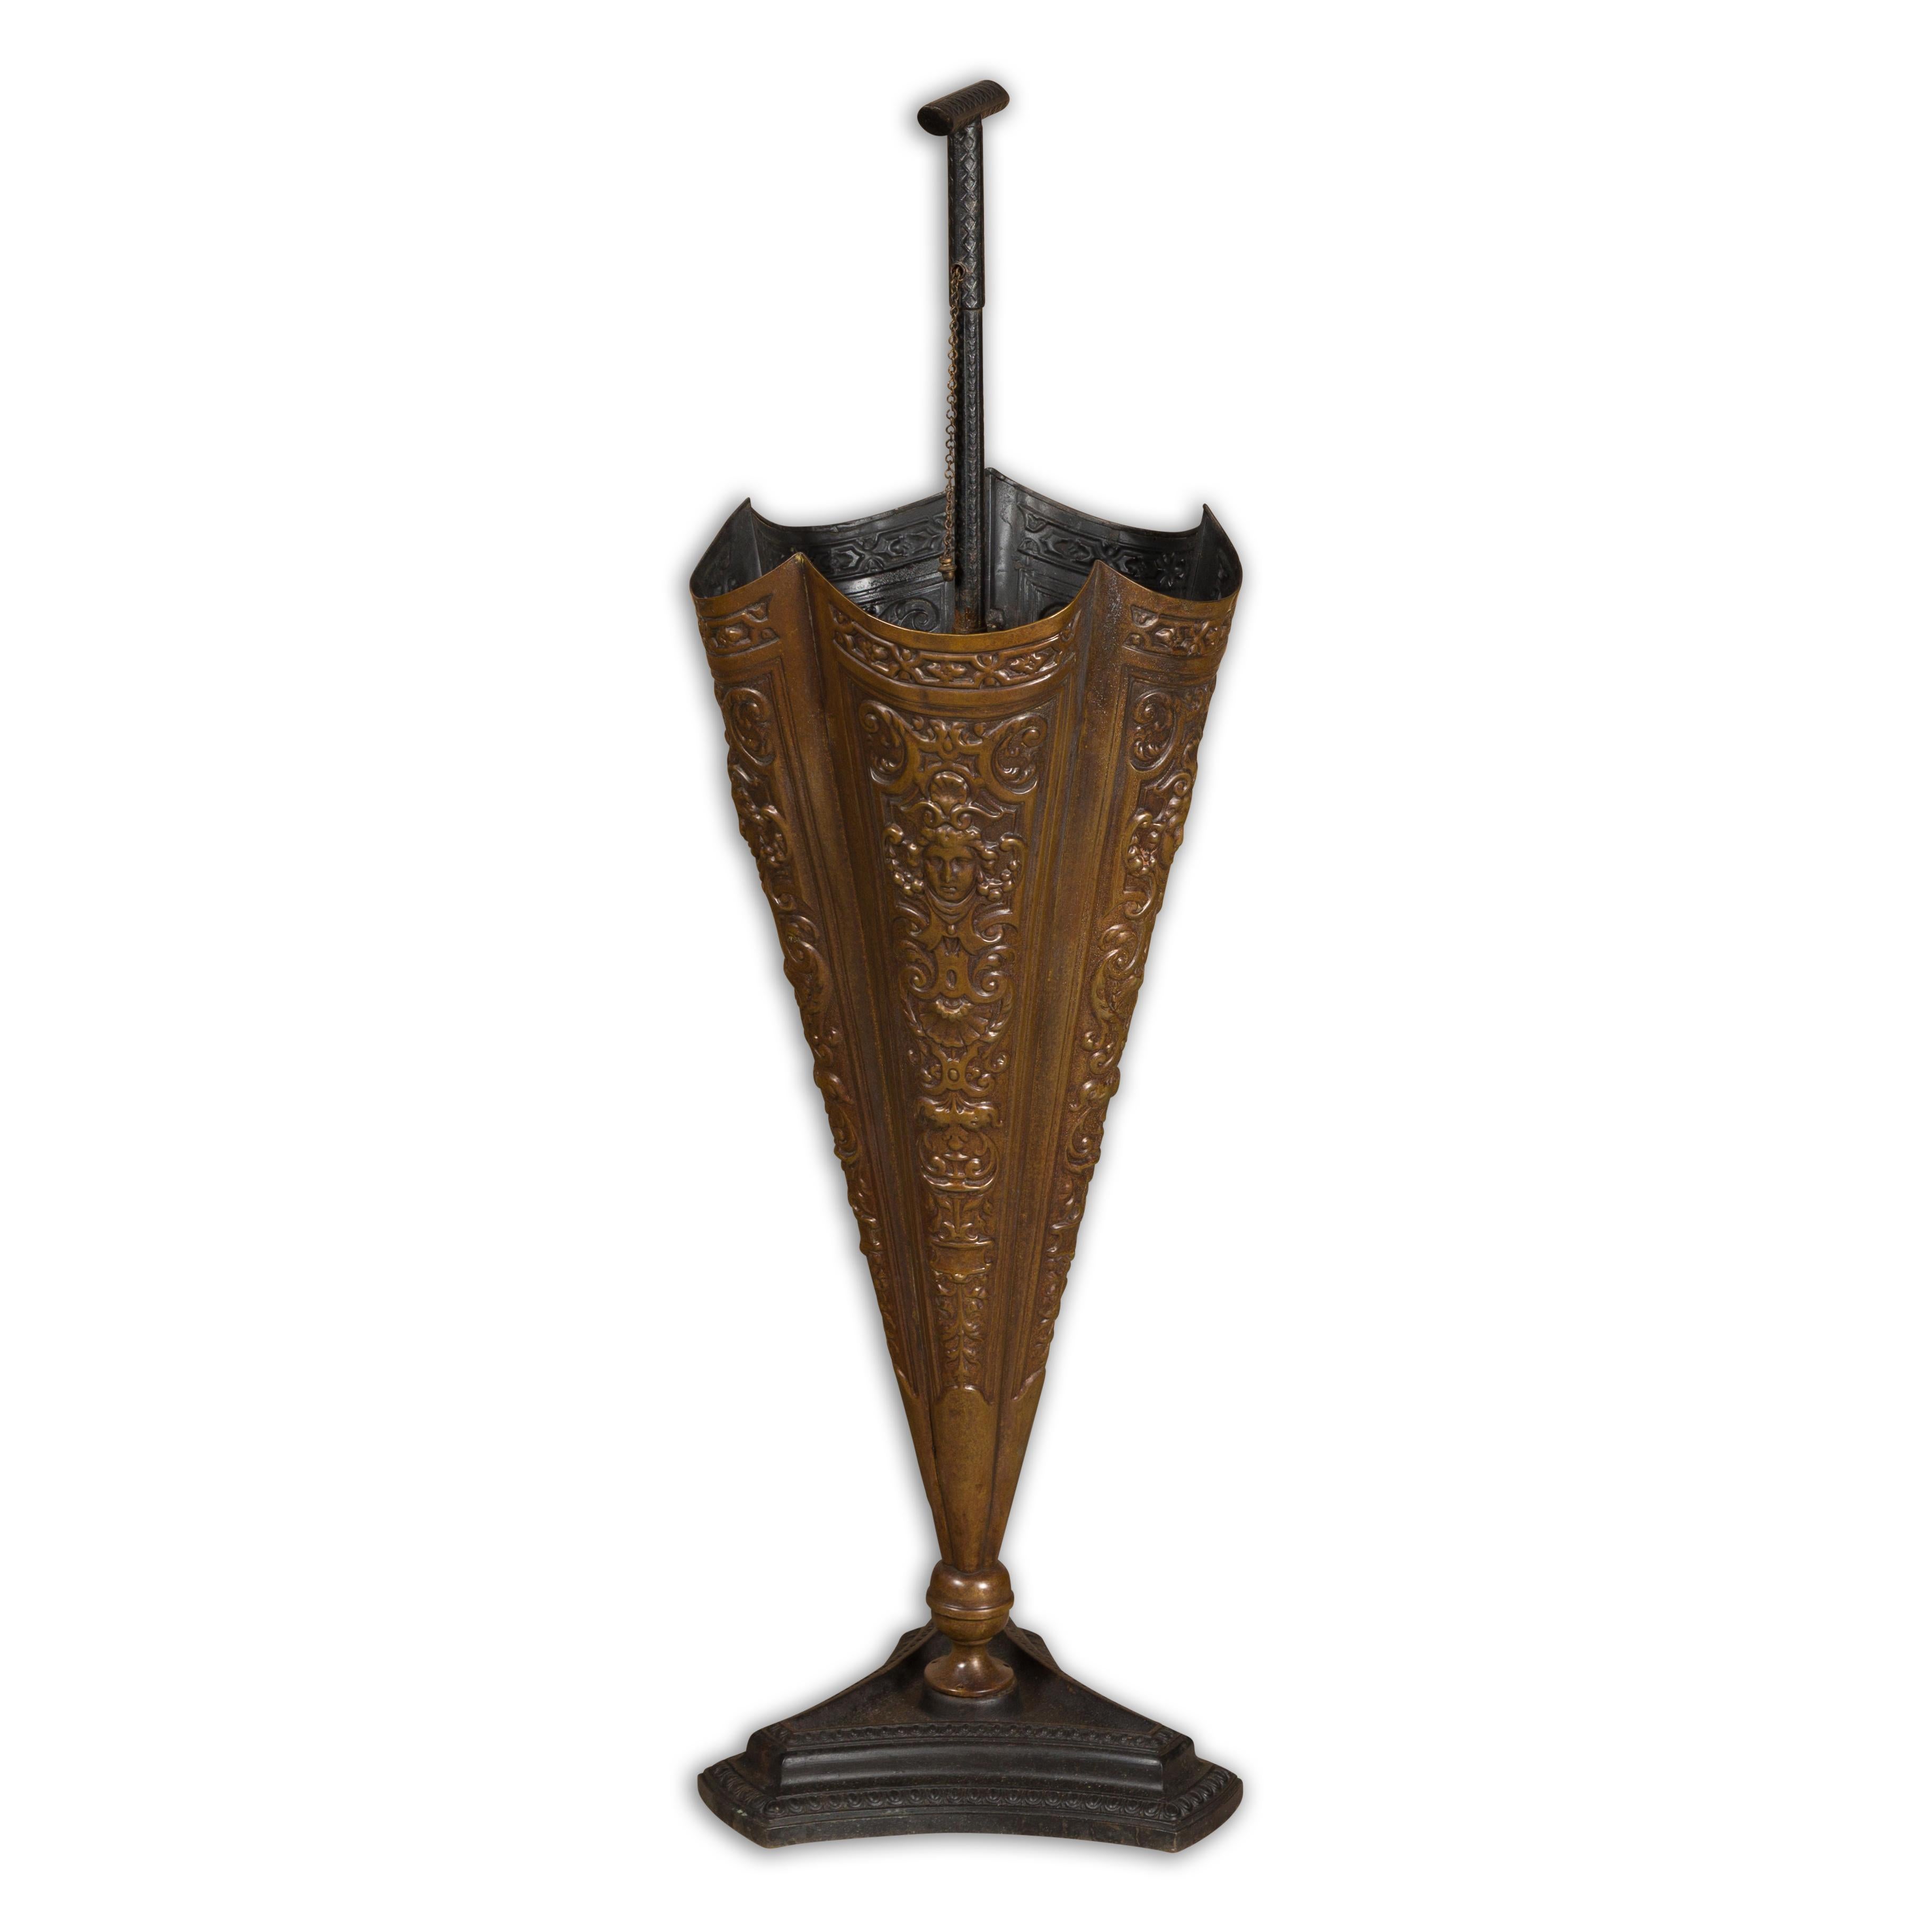 An English brass umbrella stand from circa 1920-1930 shaped as an umbrella with raised motifs and tripartite base. Step into the world of whimsical charm with this English brass umbrella stand from the vibrant era of the 1920s-1930s. Artfully